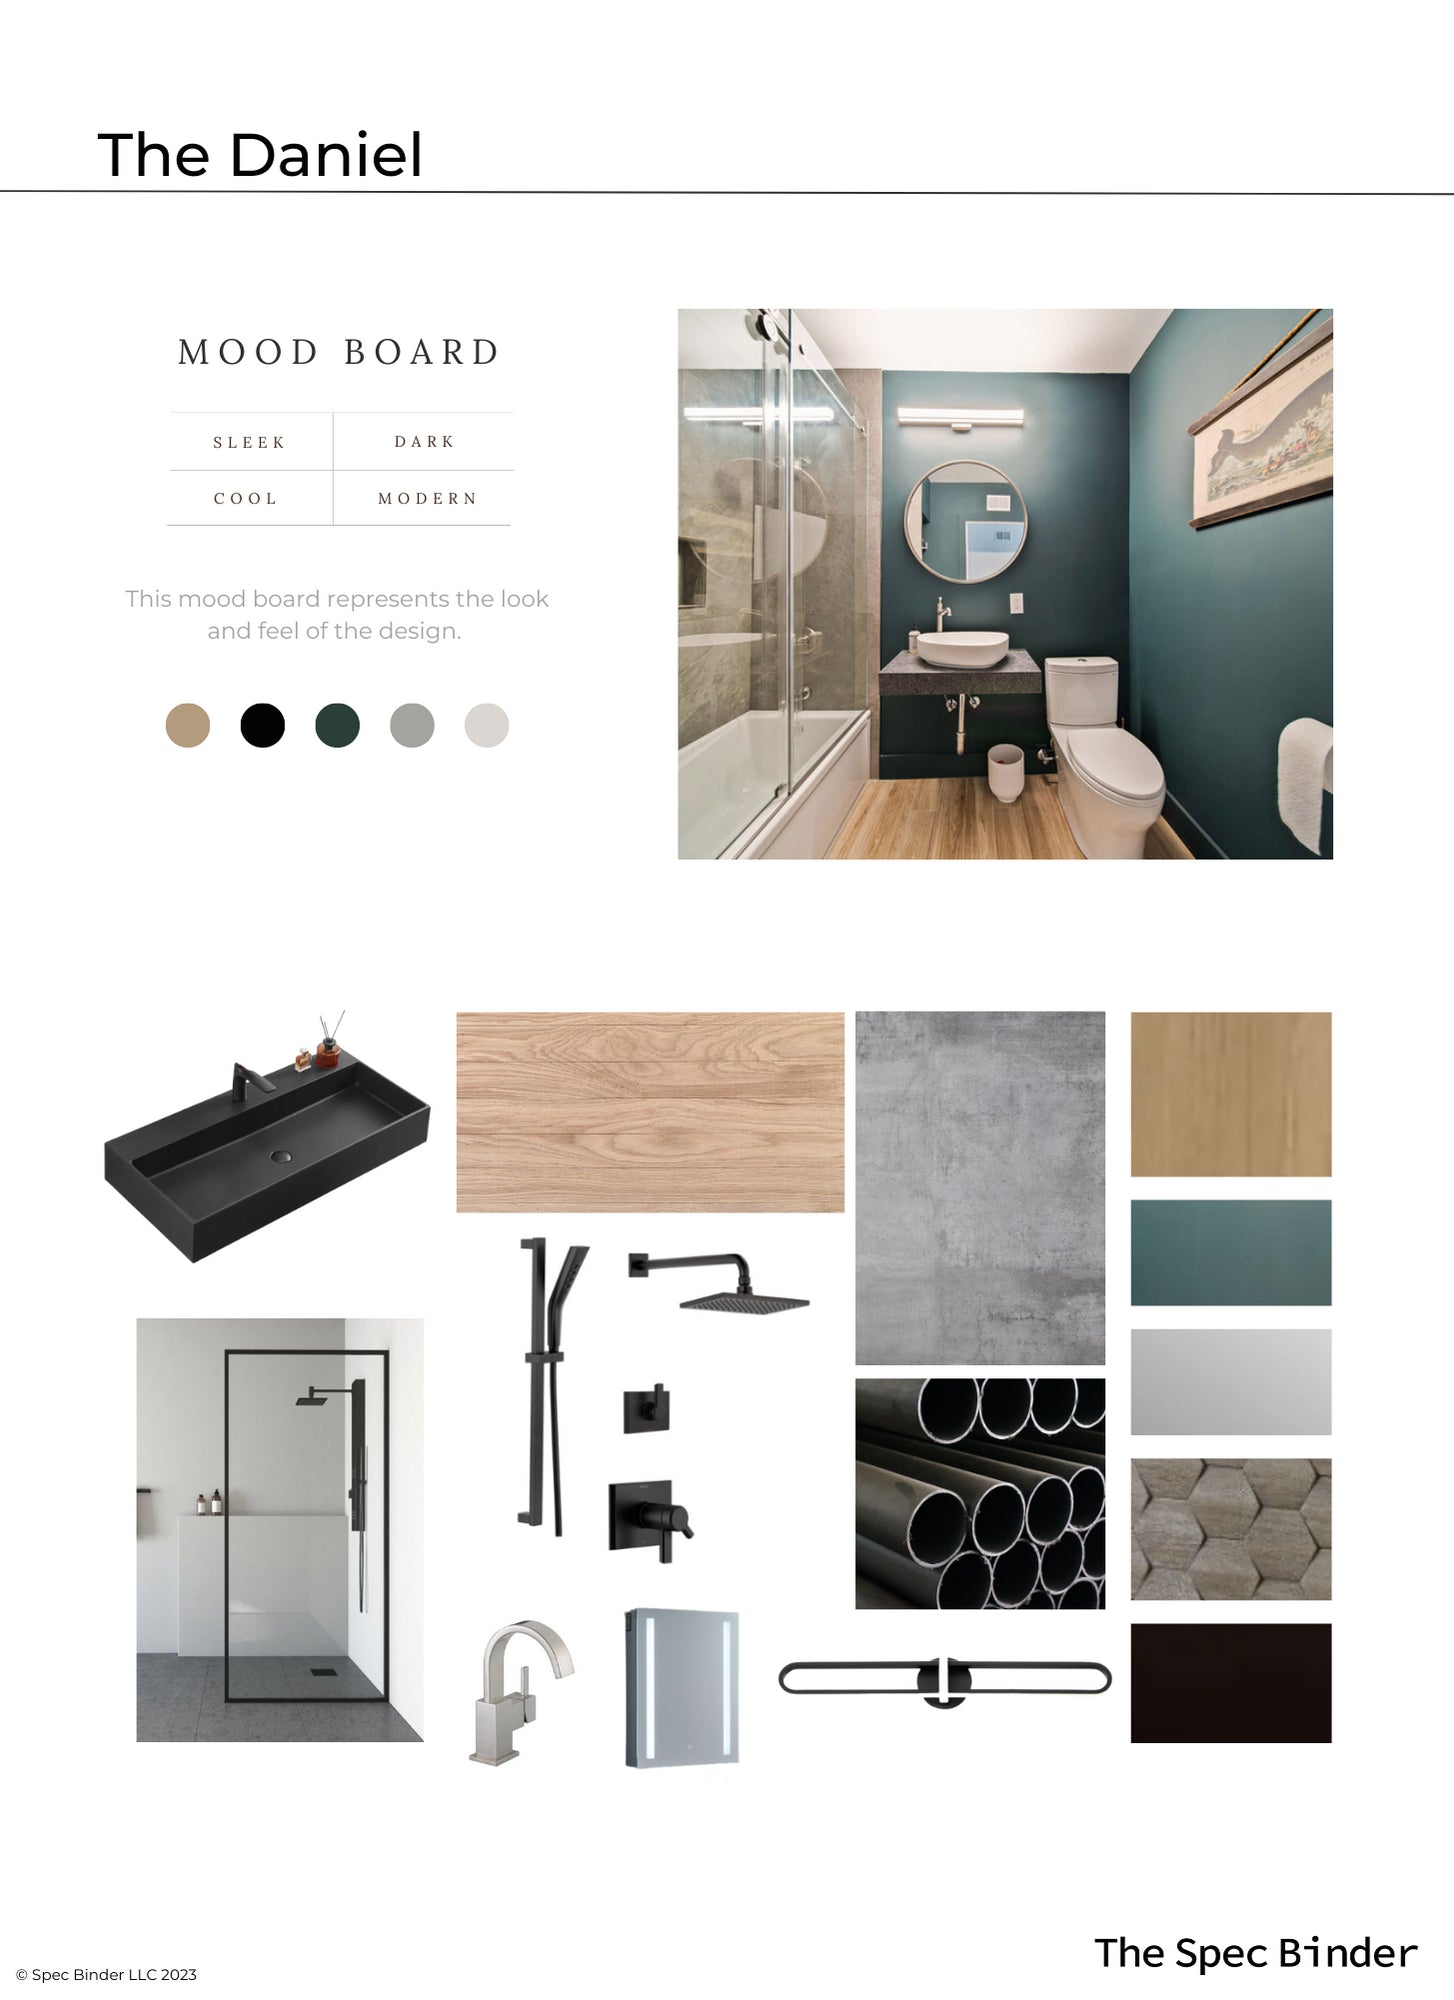 Moodboard image showing the look and feel of the design, featuring textures, patterns, colors, and finishing materials